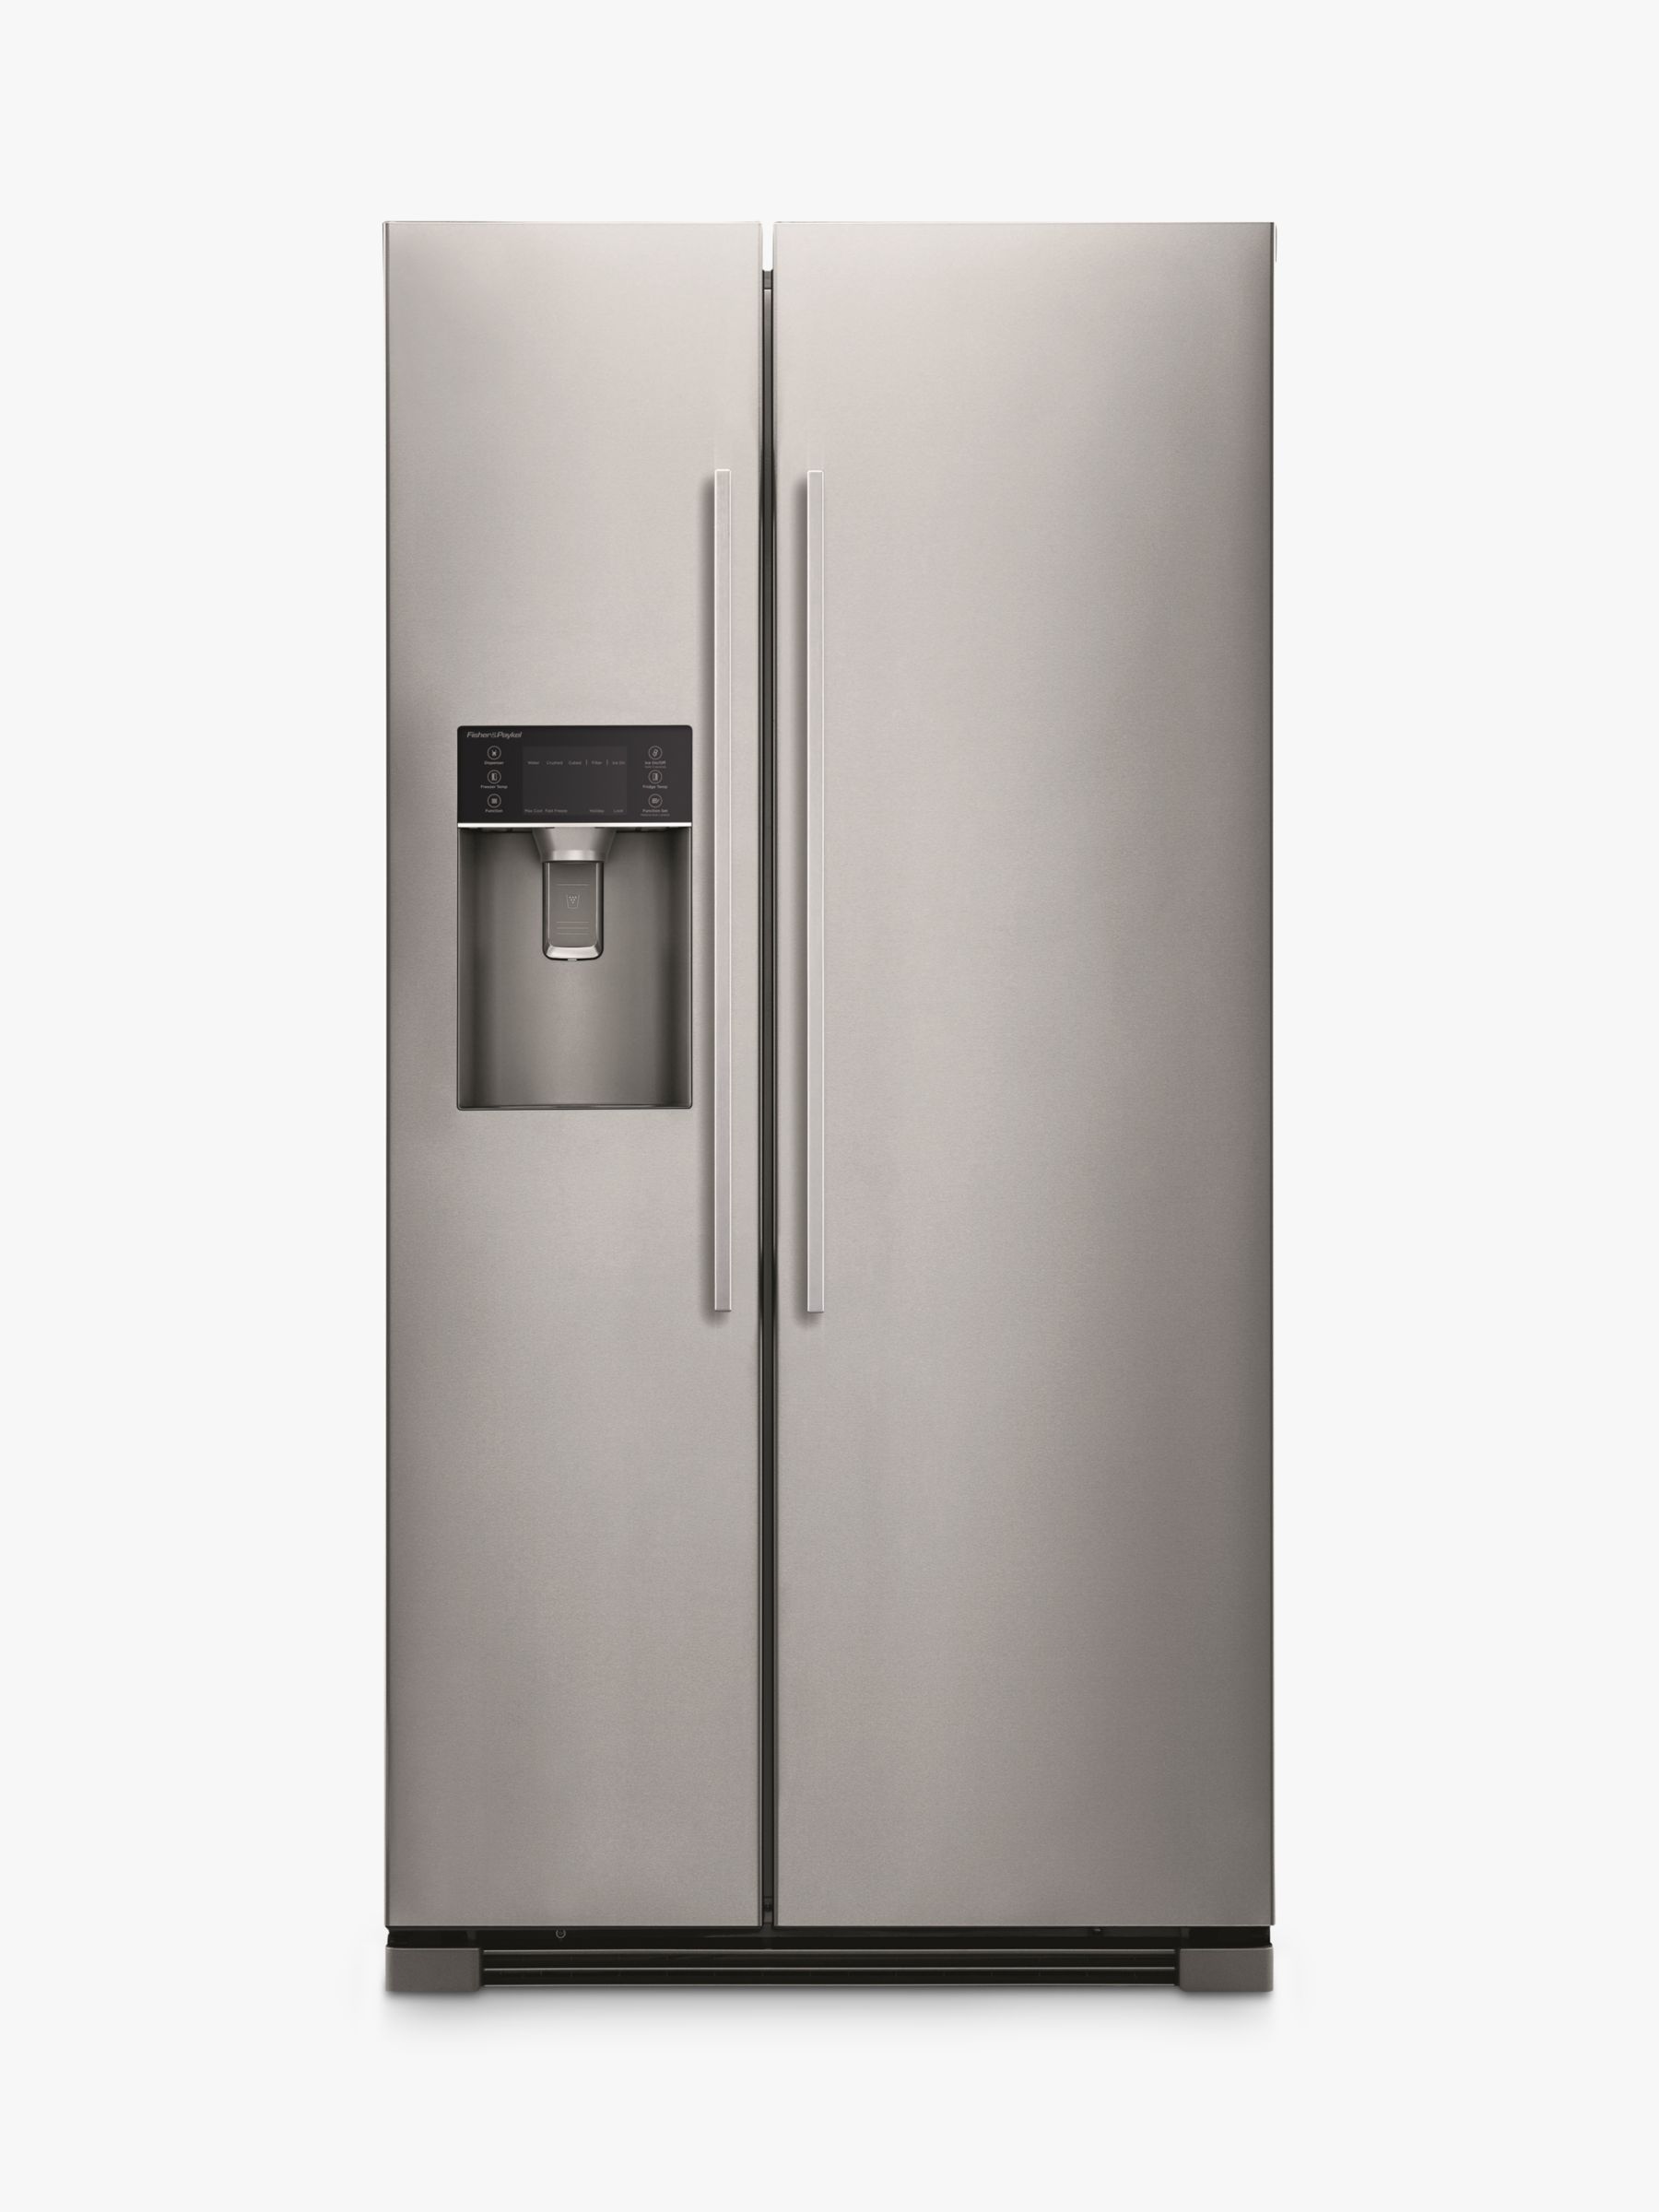 Fisher & Paykel RX611DUX American Style Fridge Freezer, Stainless Steel